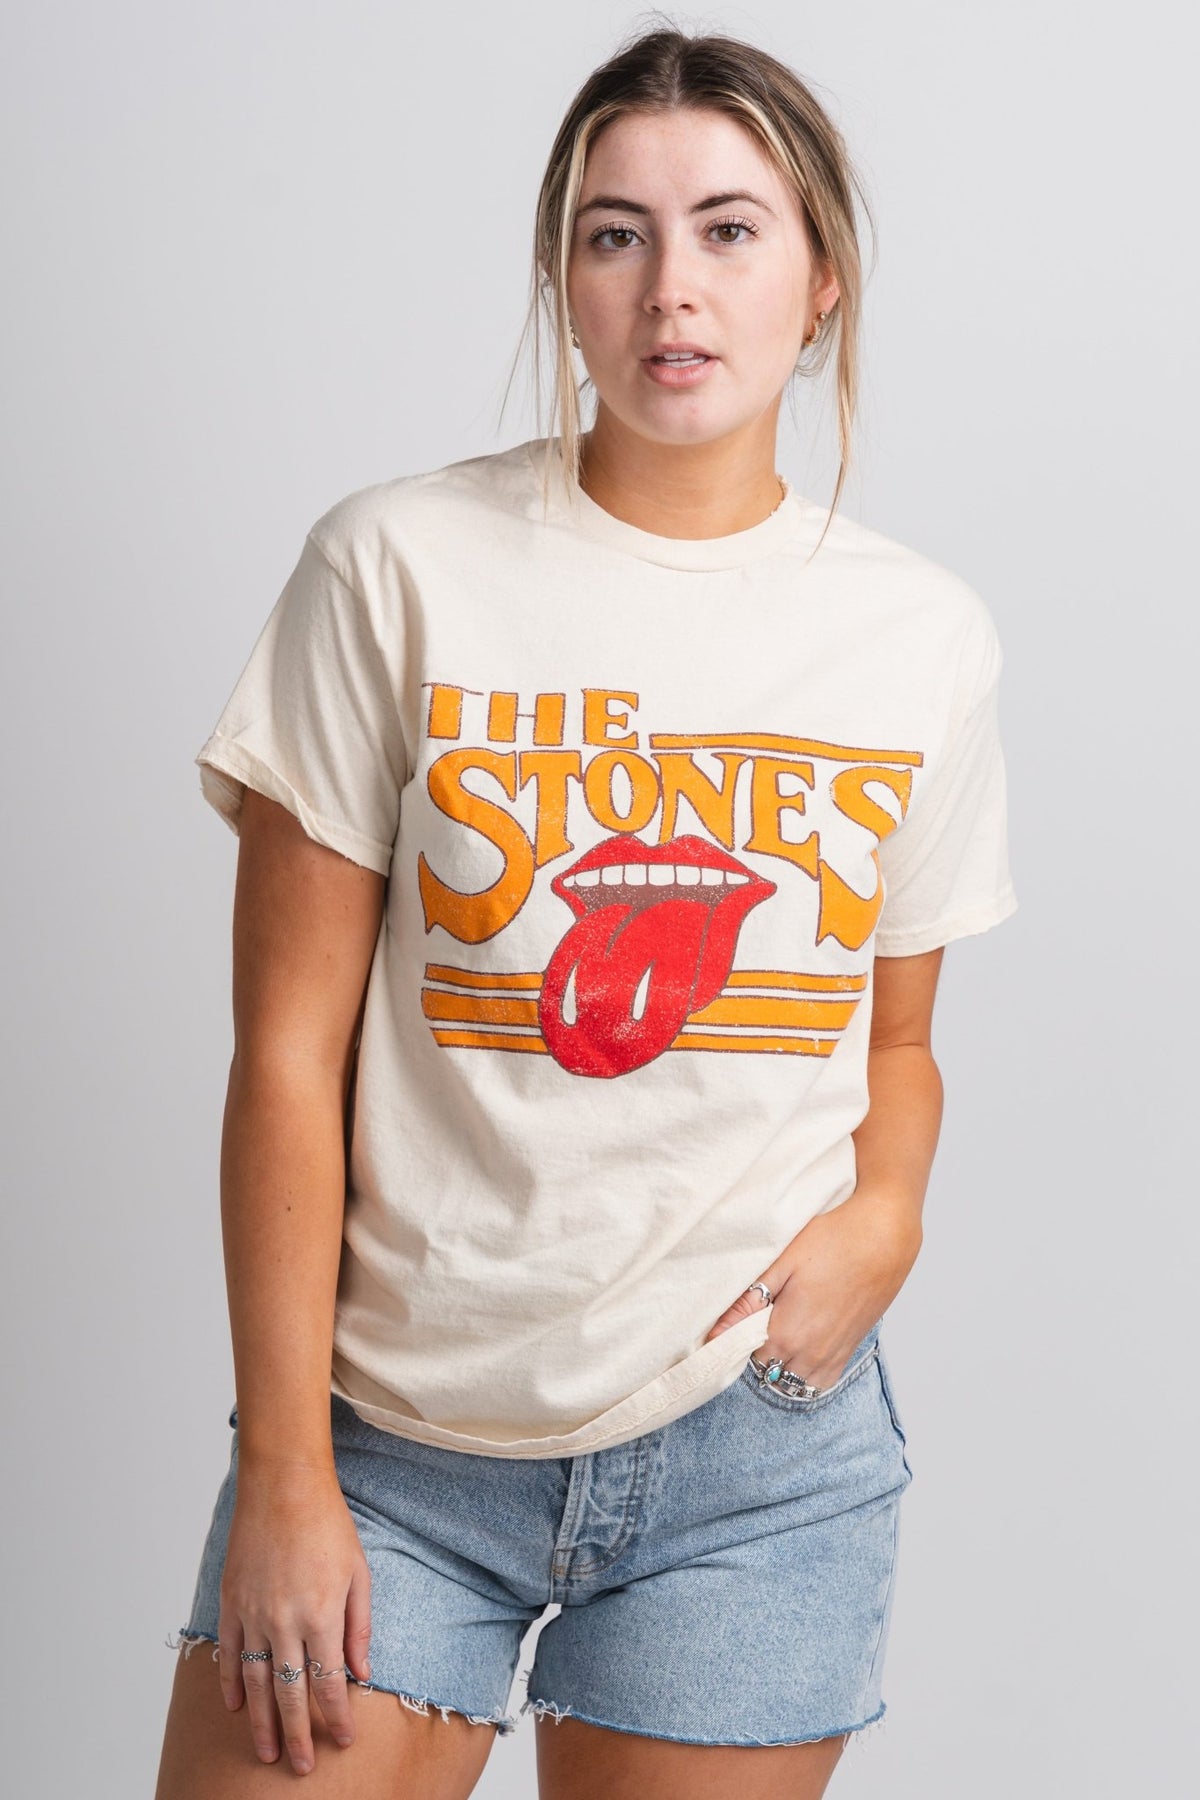 Rolling Stones stoned thrifted t-shirt off white - Trendy Band T-Shirts and Sweatshirts at Lush Fashion Lounge Boutique in Oklahoma City